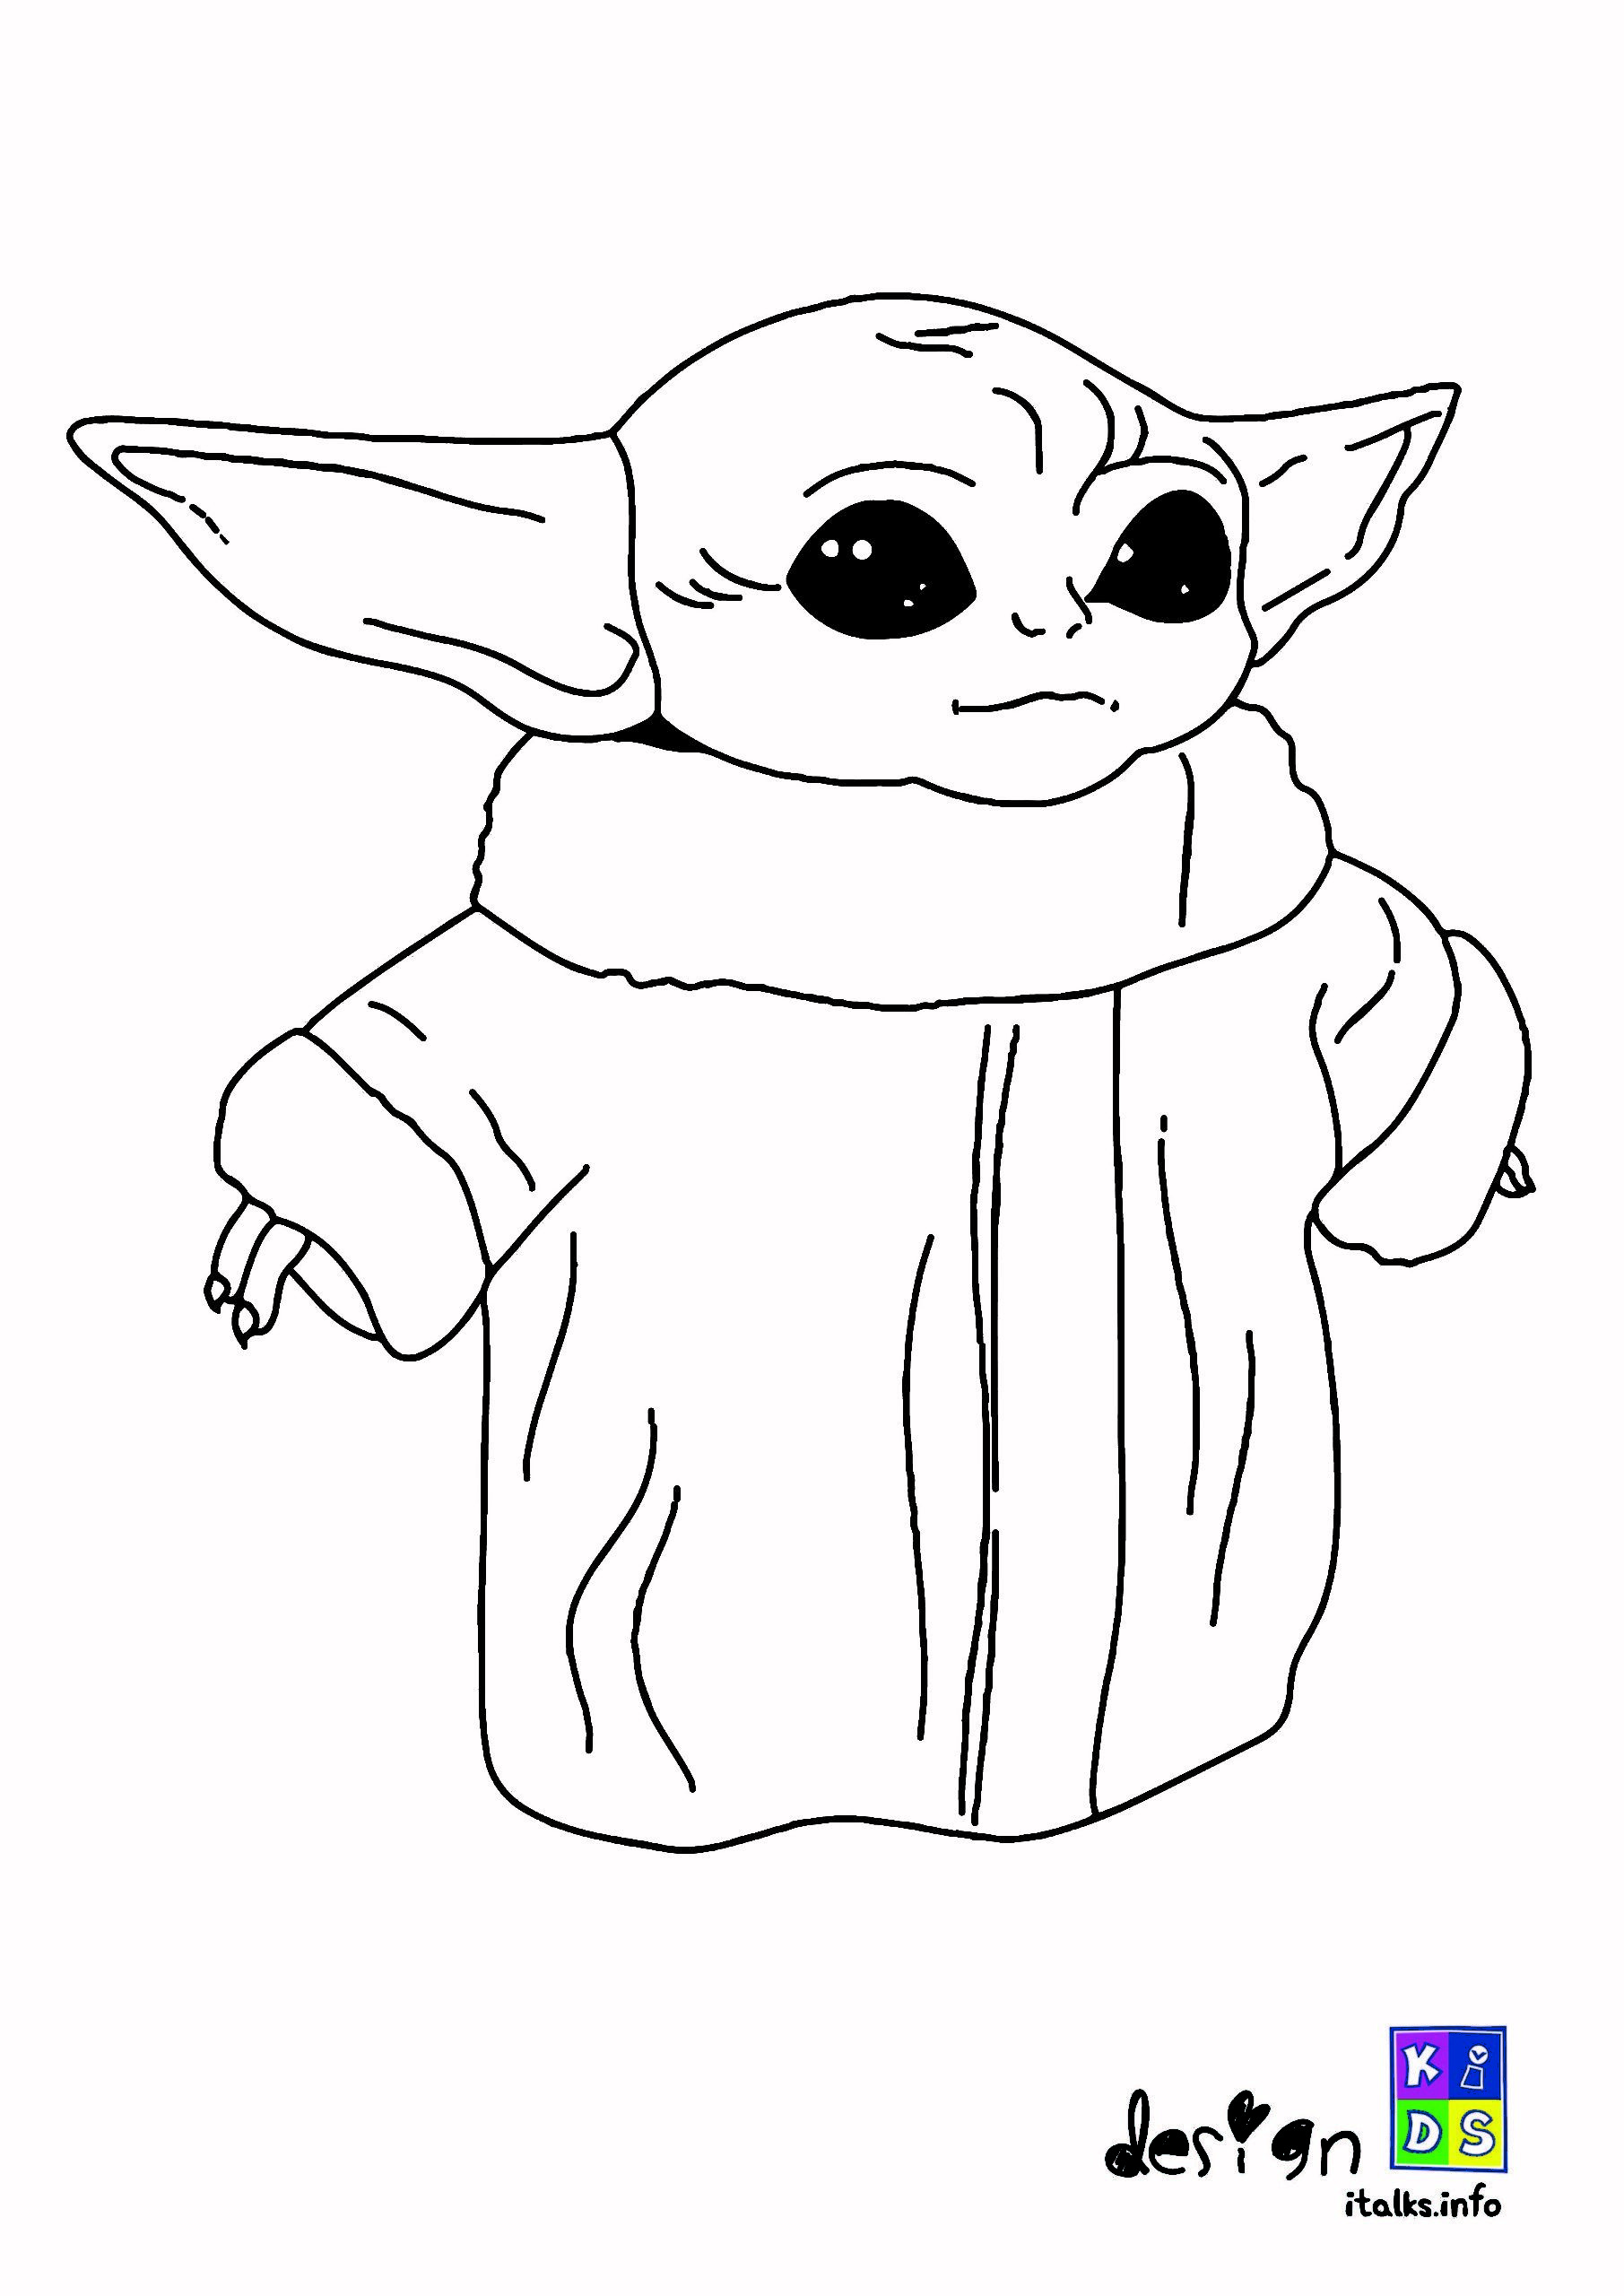 Baby Yoda Coloring Pages Pdf Star Wars Coloring Pages Free Printable